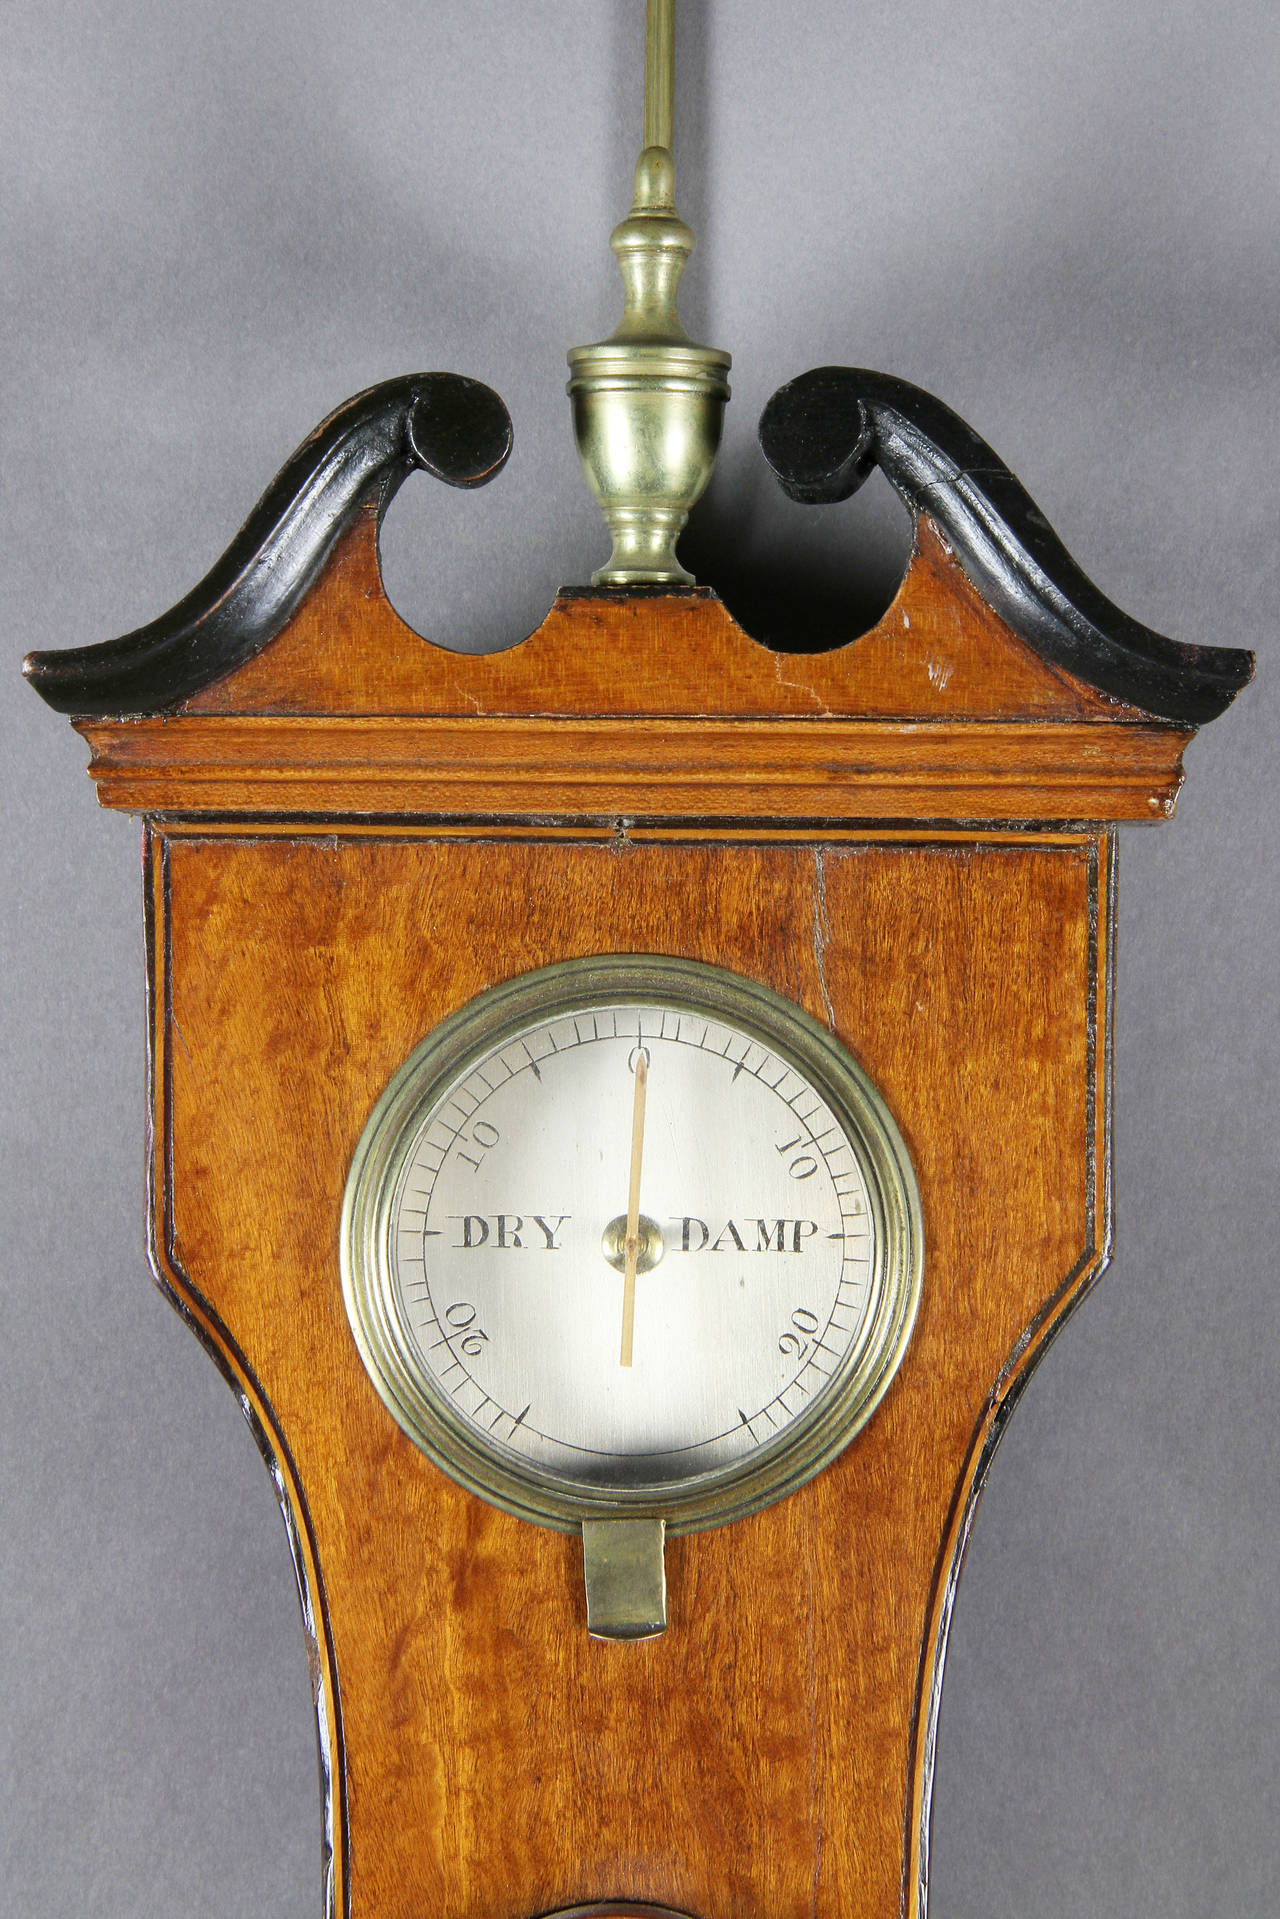 Typical form with scroll pediment over a hydrometer and a thermometer, a barometer dial and level by Del Vecchio, Dublin.